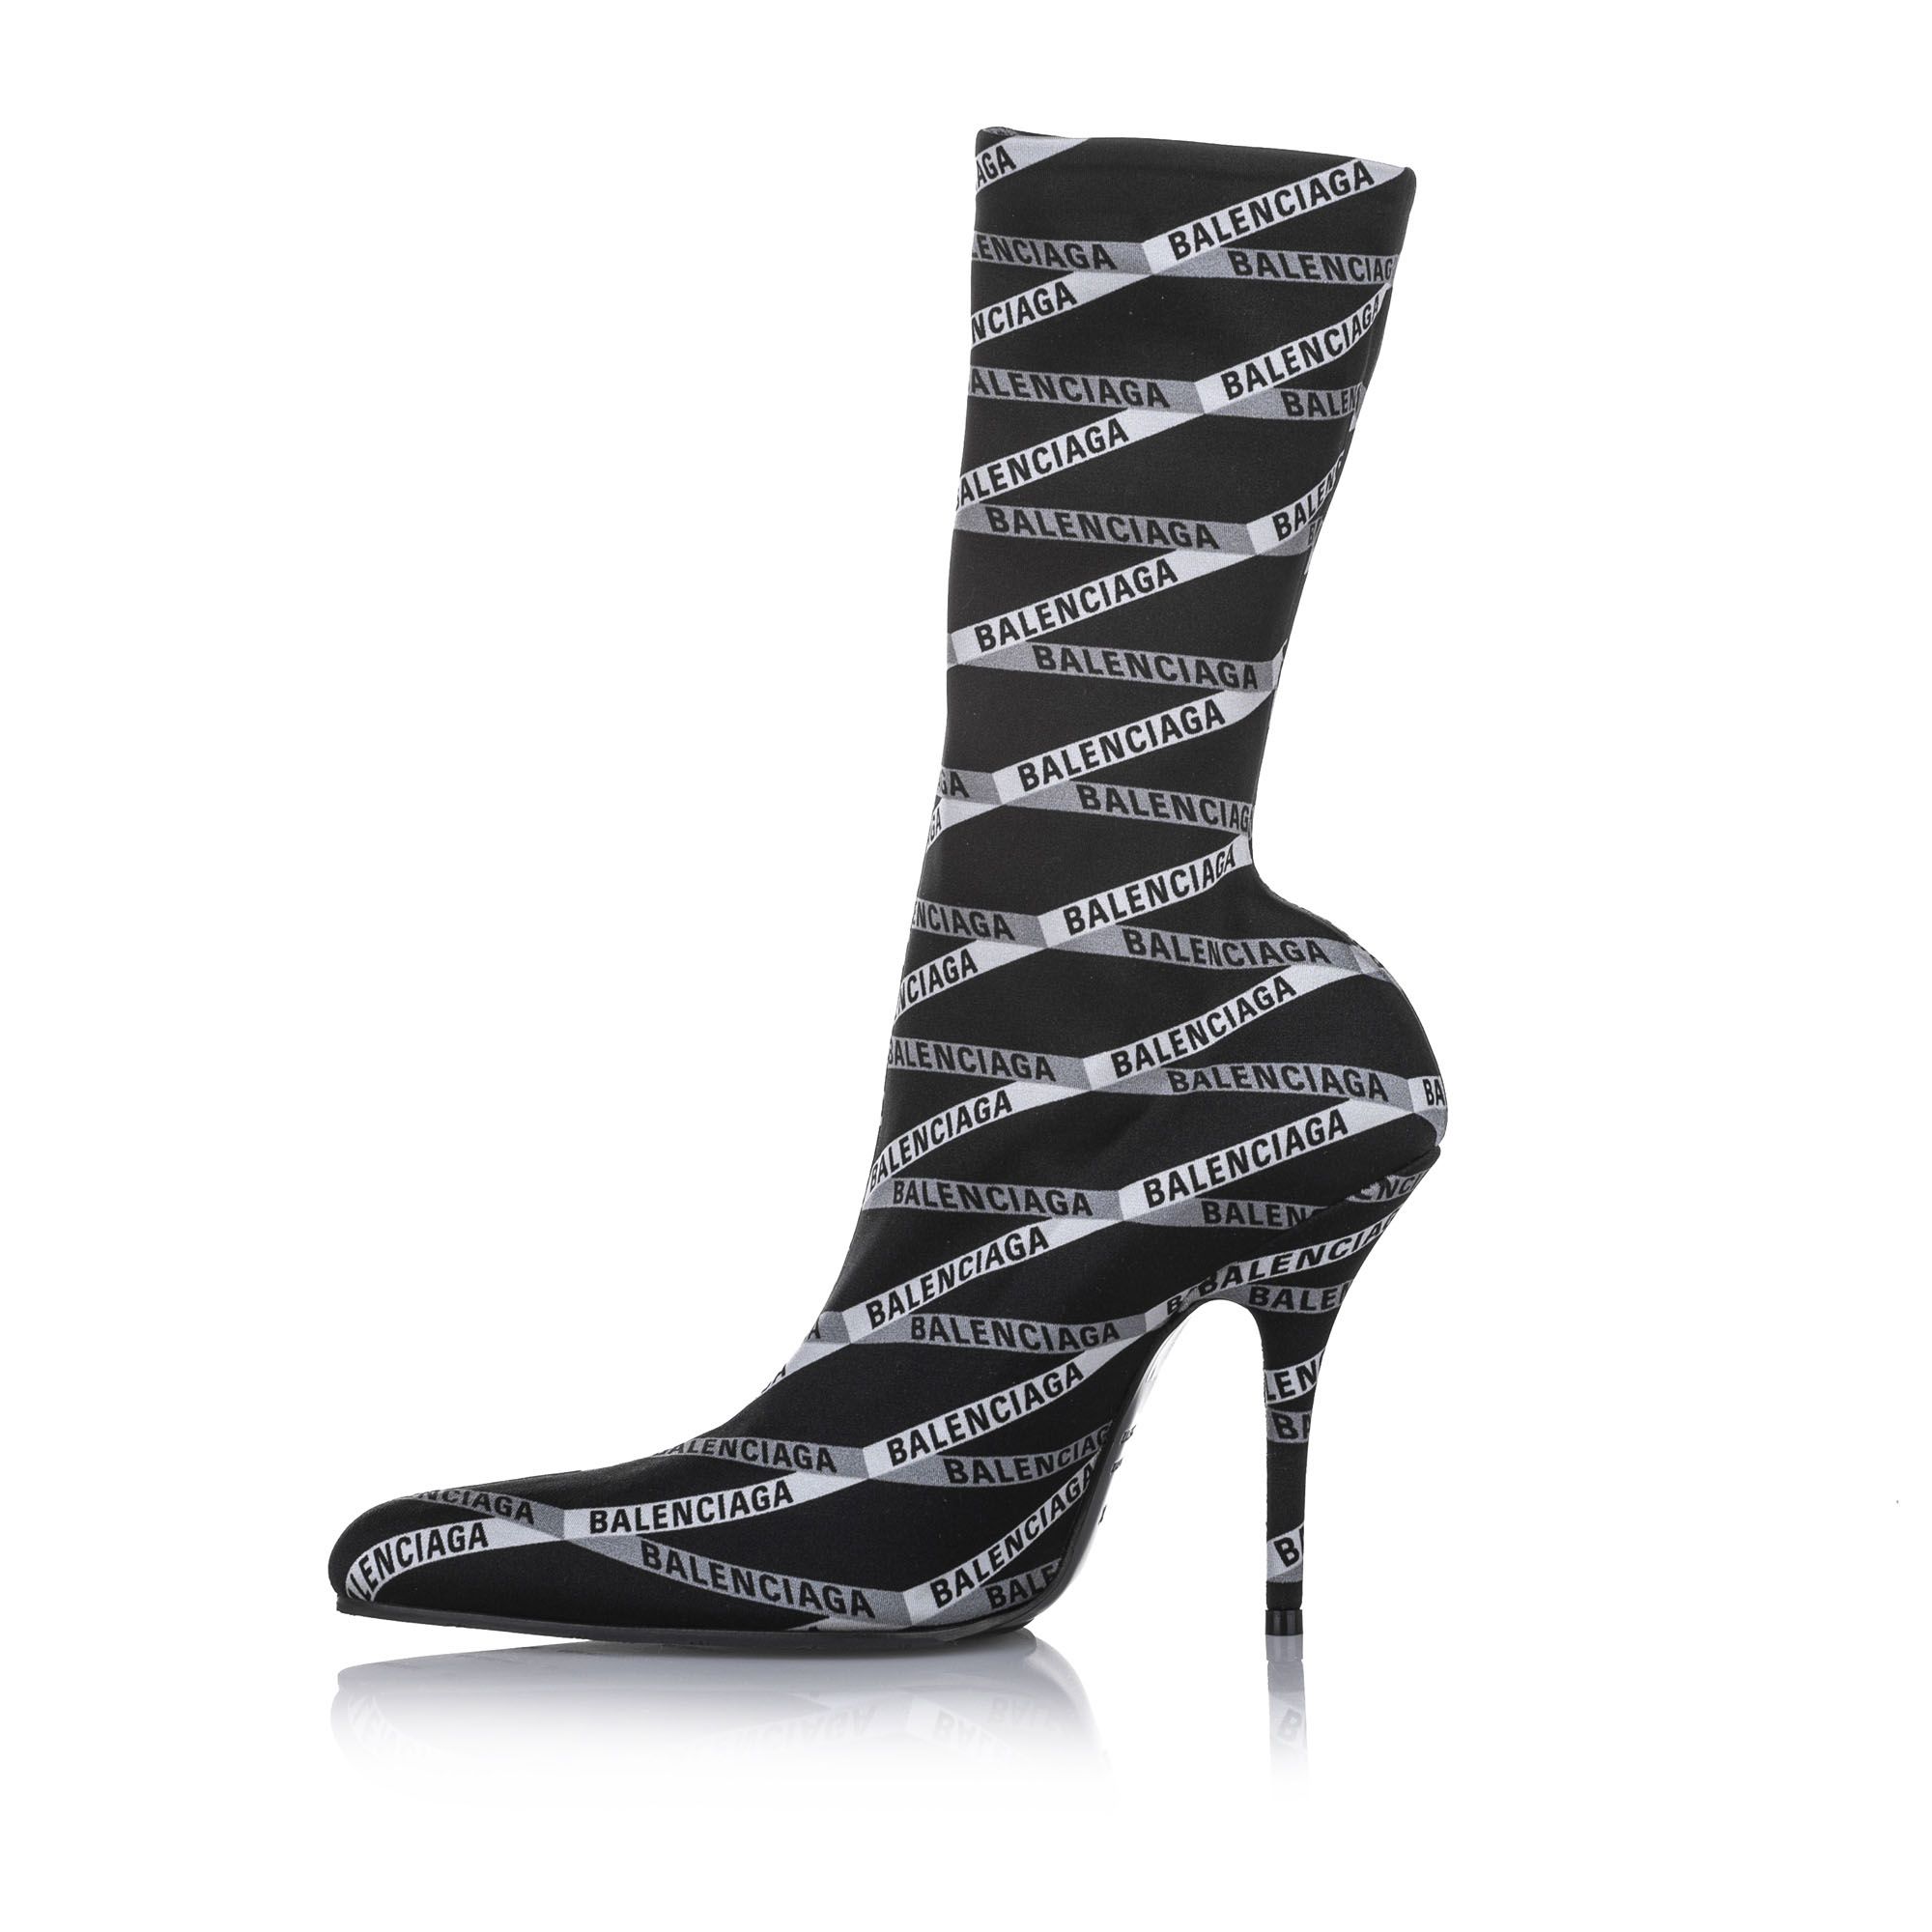 These boots feature a printed jersey crepe upper, leather insoles, stiletto heels, and leather soles. Heel height: 8 cm.
Dimensions:
Length 23cm
Width 7cm

Original Accessories: Dust Bag, Box

Serial Number: 549784
Color: Black x White
Material: Fabric x Others x Leather x Calf
Country of Origin: Italy
Boutique Reference: SSU80324K1342


Product Rating: New